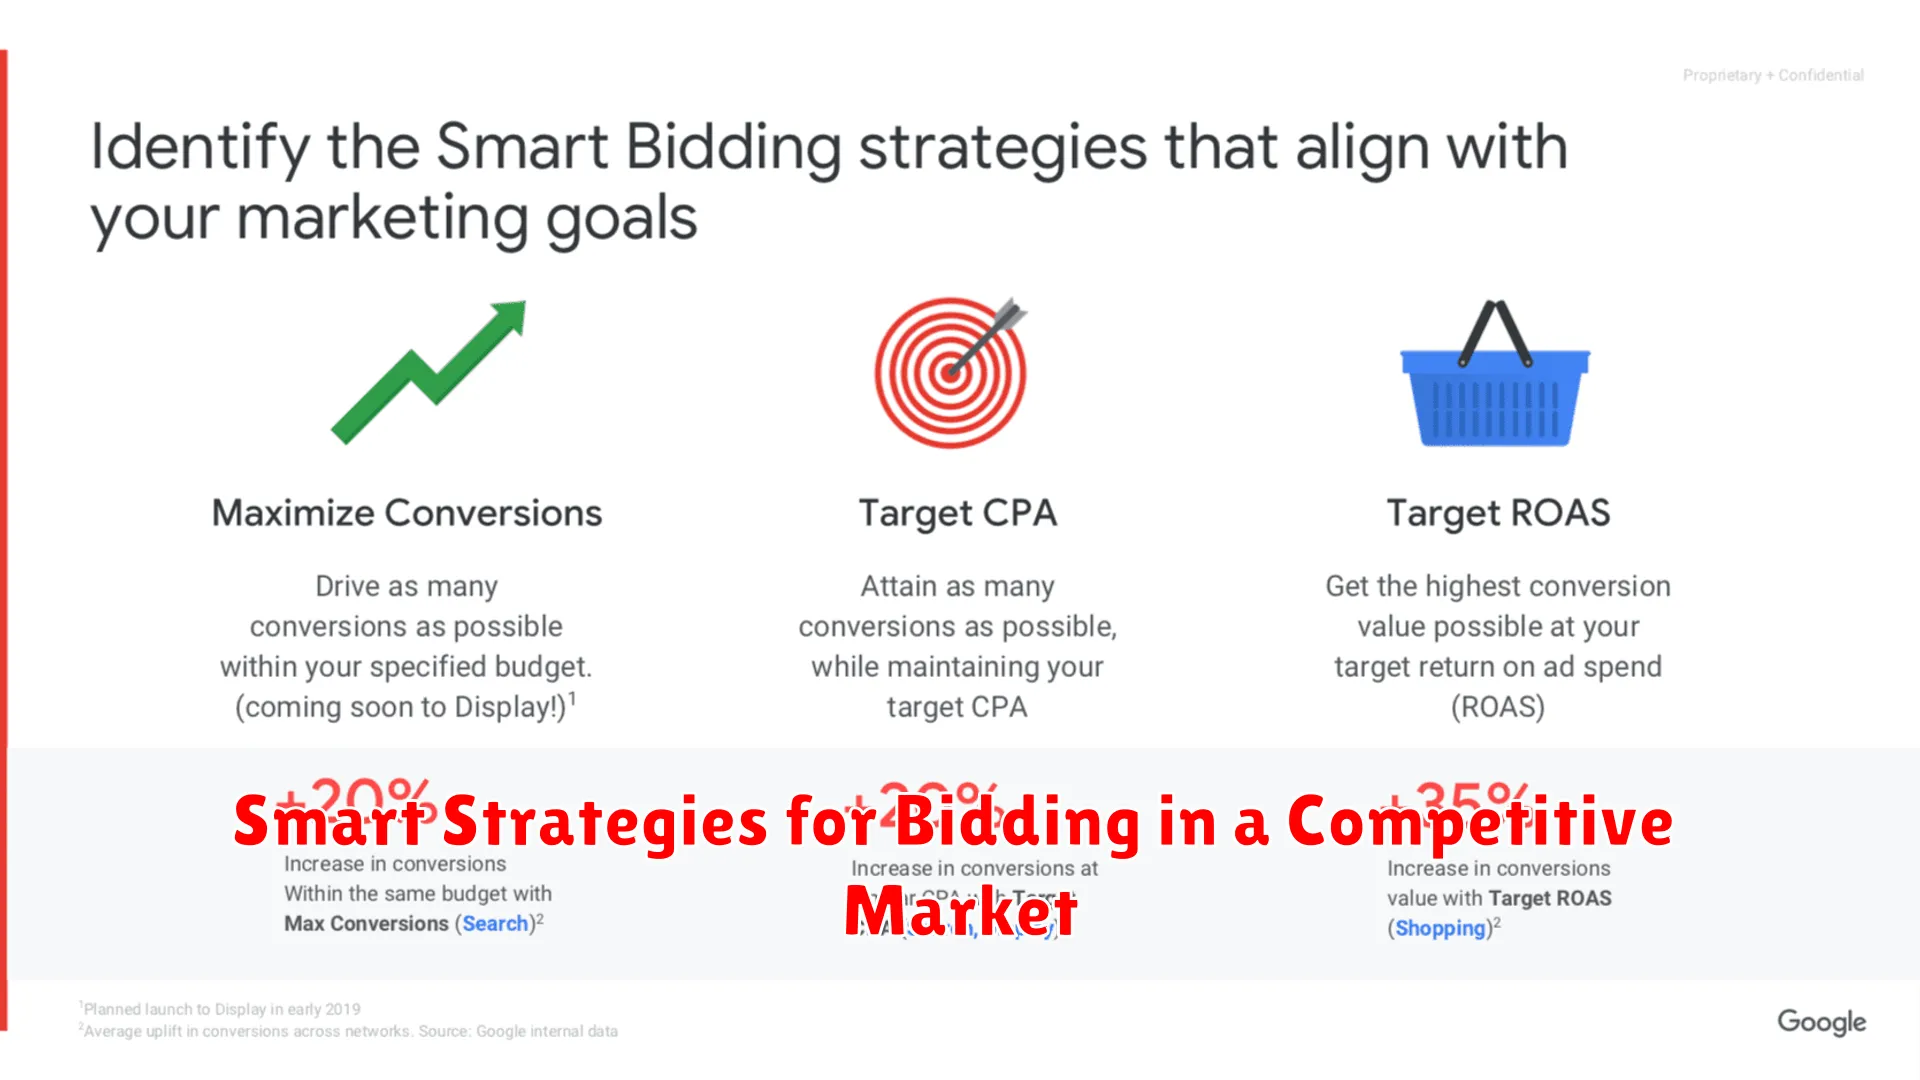 Smart Strategies for Bidding in a Competitive Market